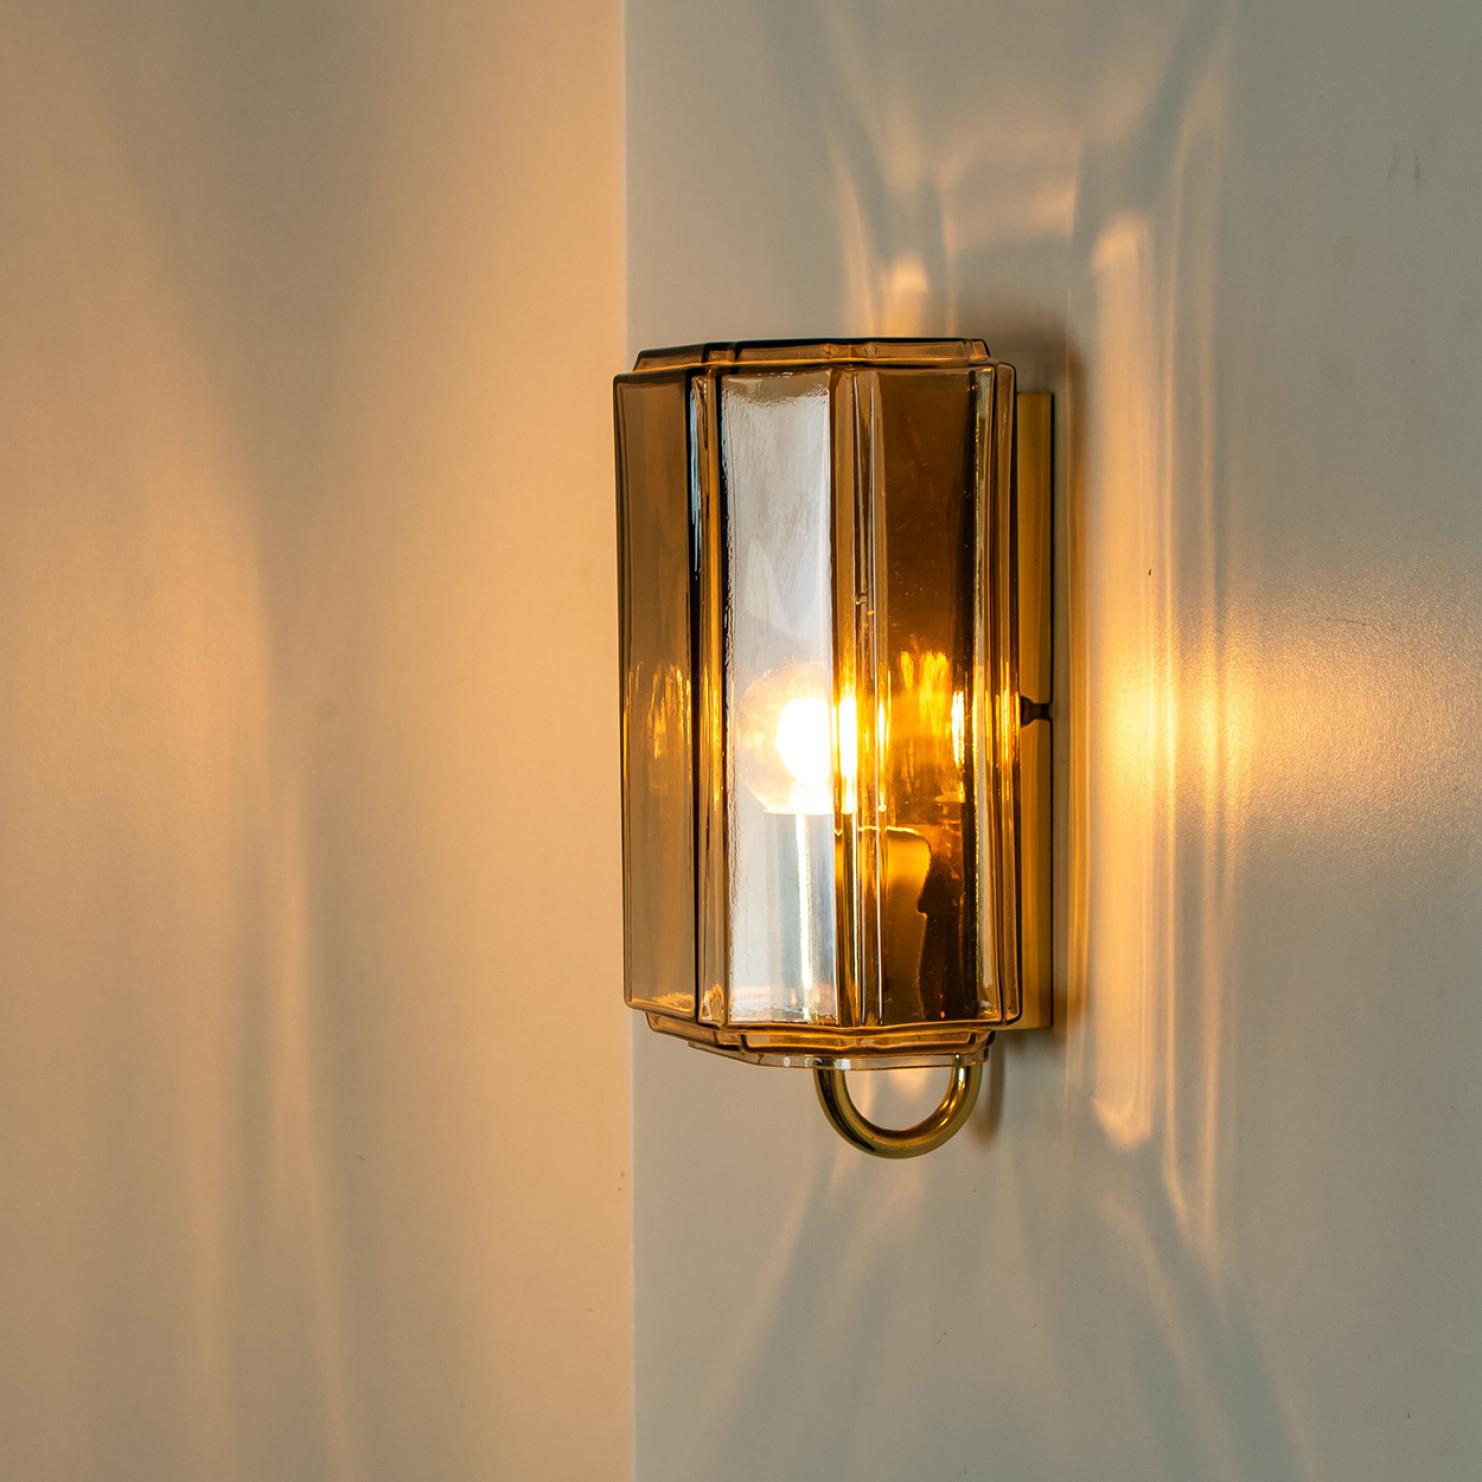 20th Century Several Smoked Glass Wall Lights Sconces by Glashütte Limburg, Germany, 1960 For Sale